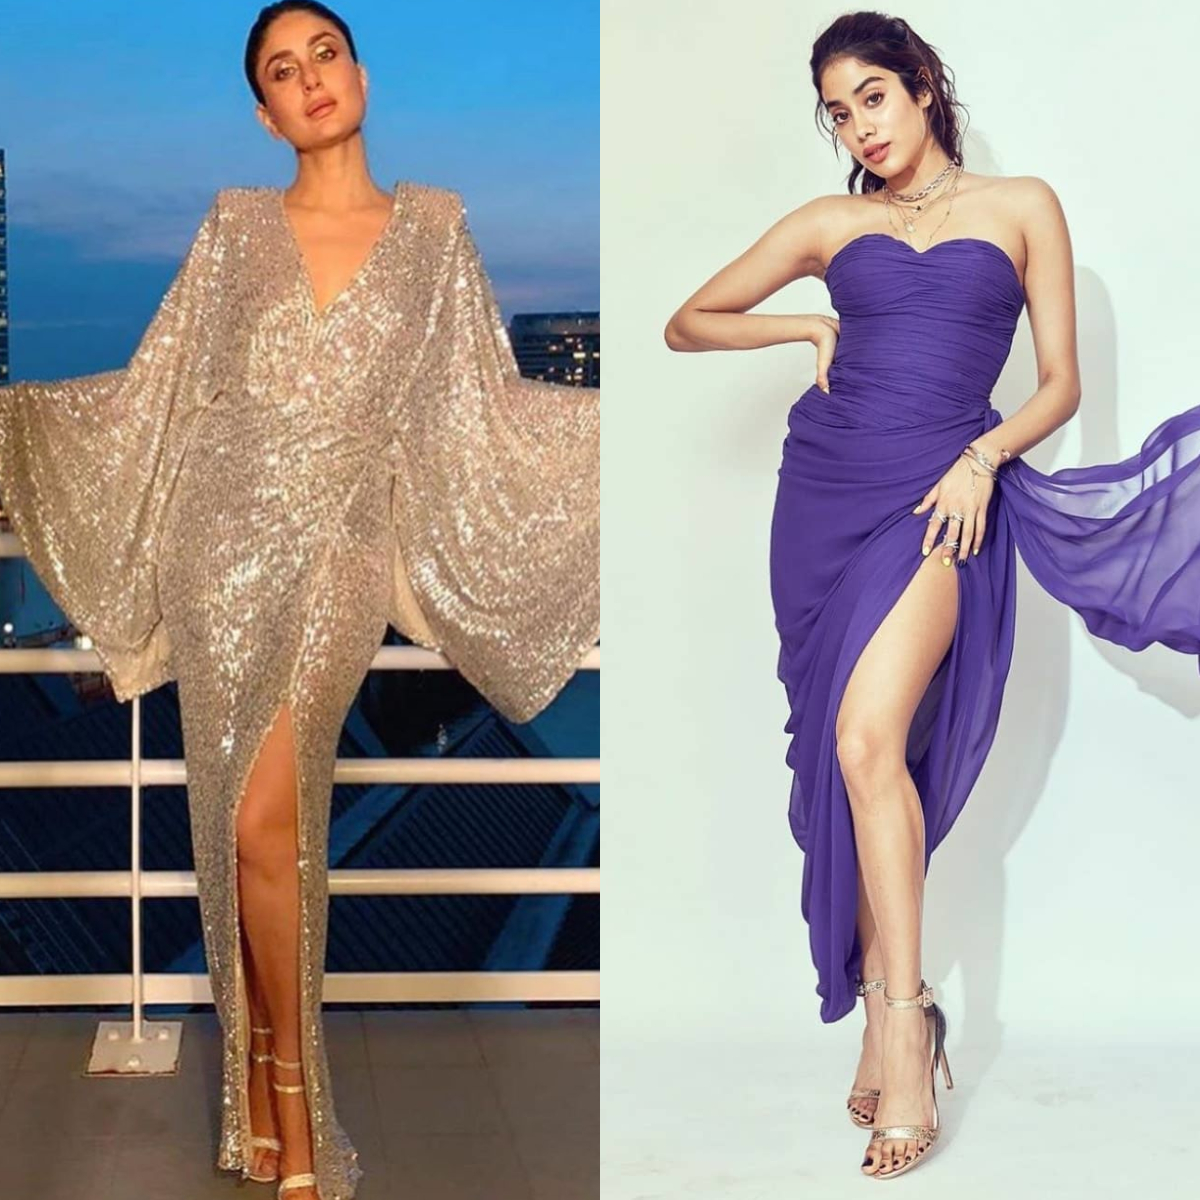 Kareena Kapoor Khan to Janhvi Kapoor: Bollywood is obsessed with THIS pair of heels &amp; it’s time you should too